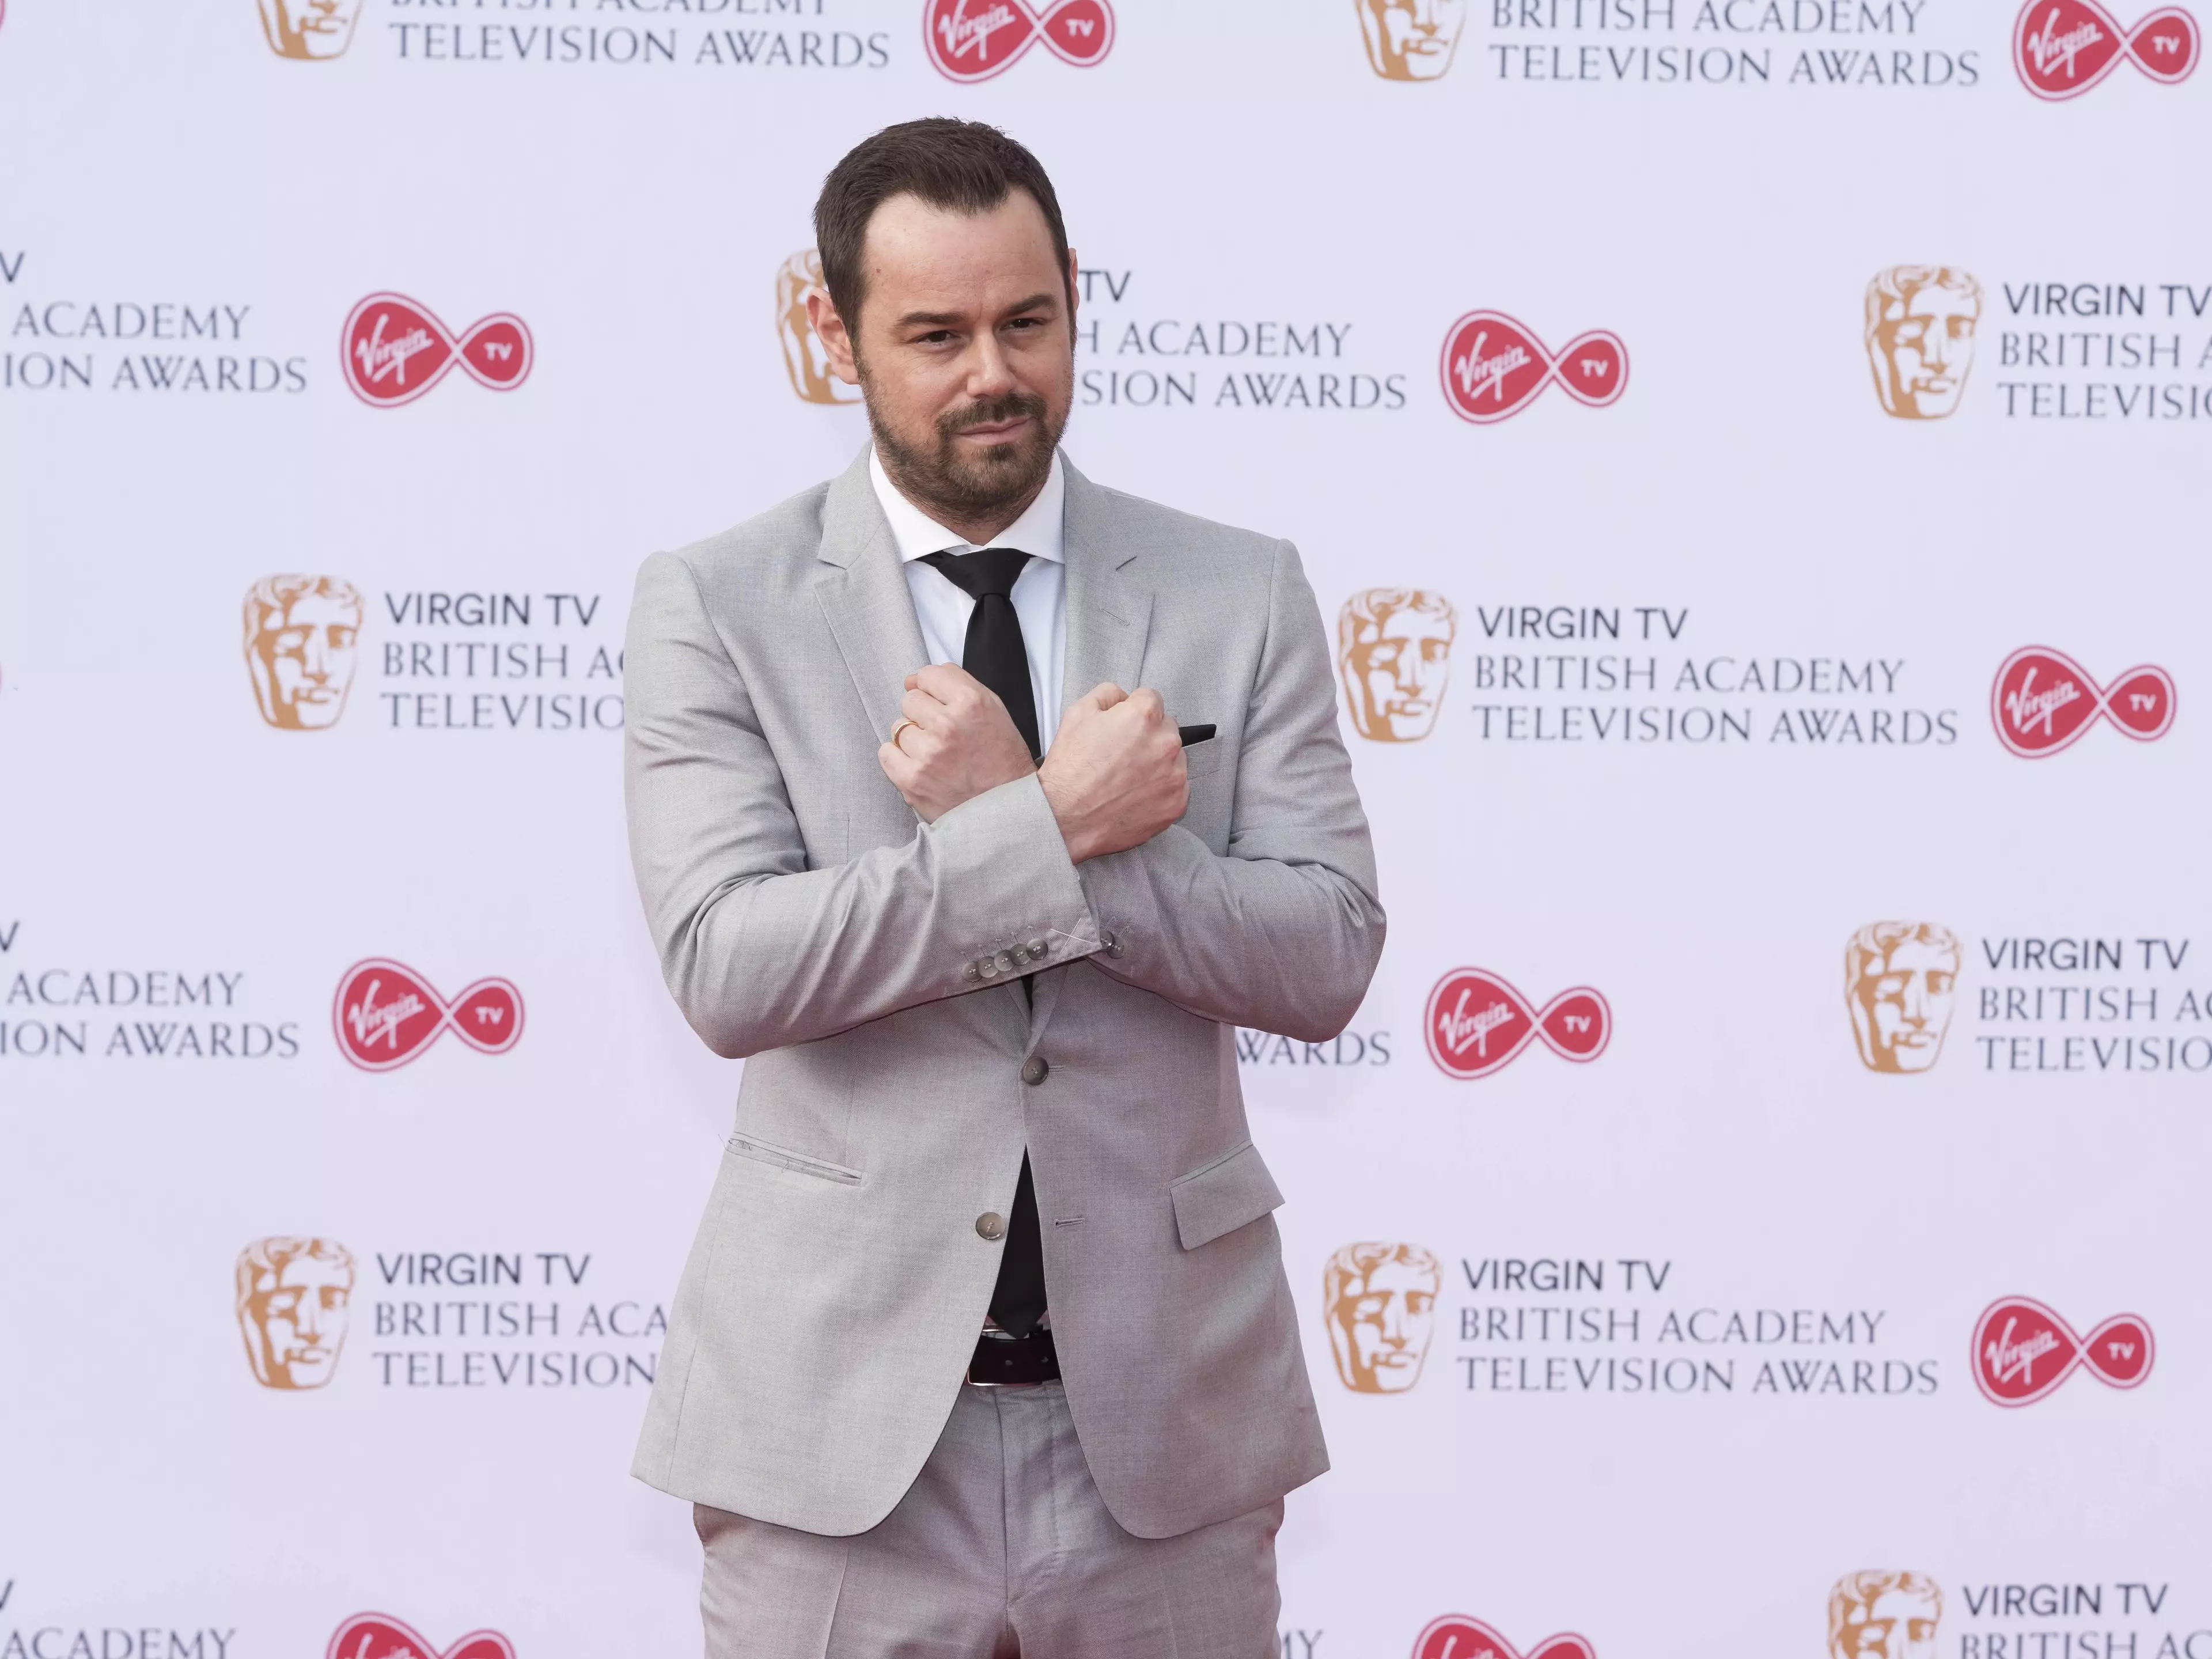 Danny Dyer & Other Celebrities Support Terminally Ill Mum's Campaign.